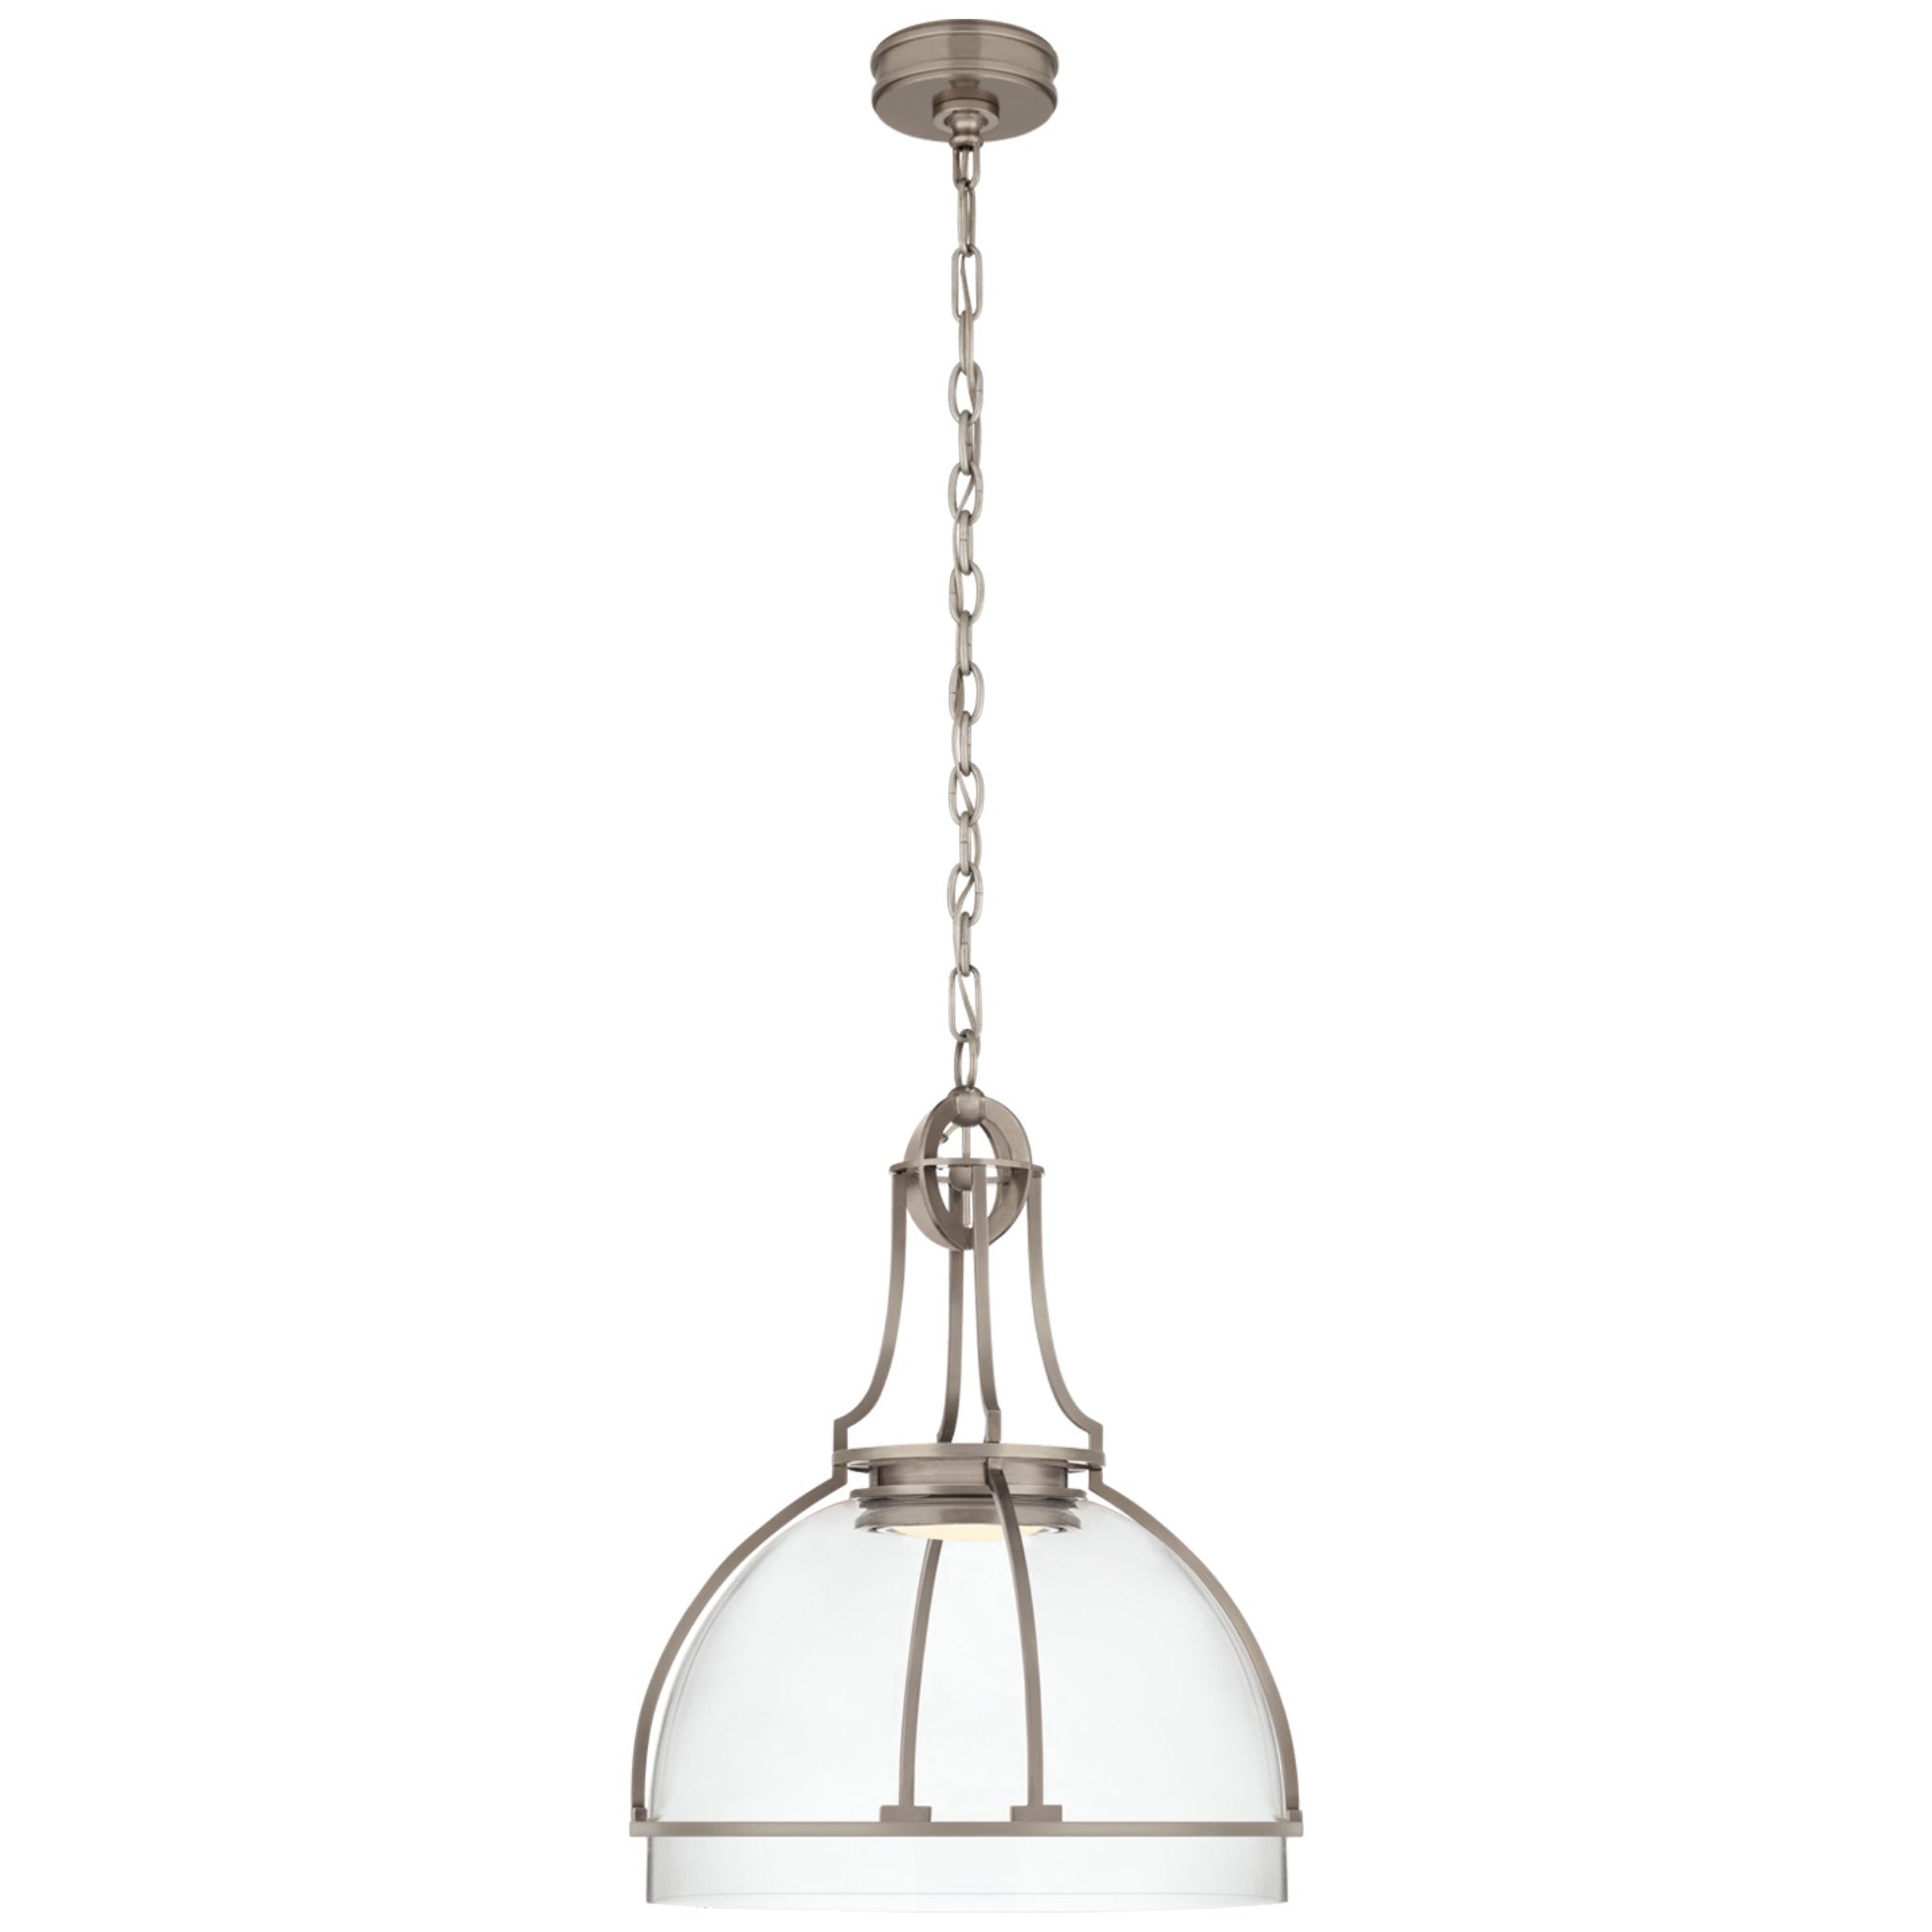 Chapman & Myers Gracie Large Dome Pendant in Antique Nickel with Clear Glass